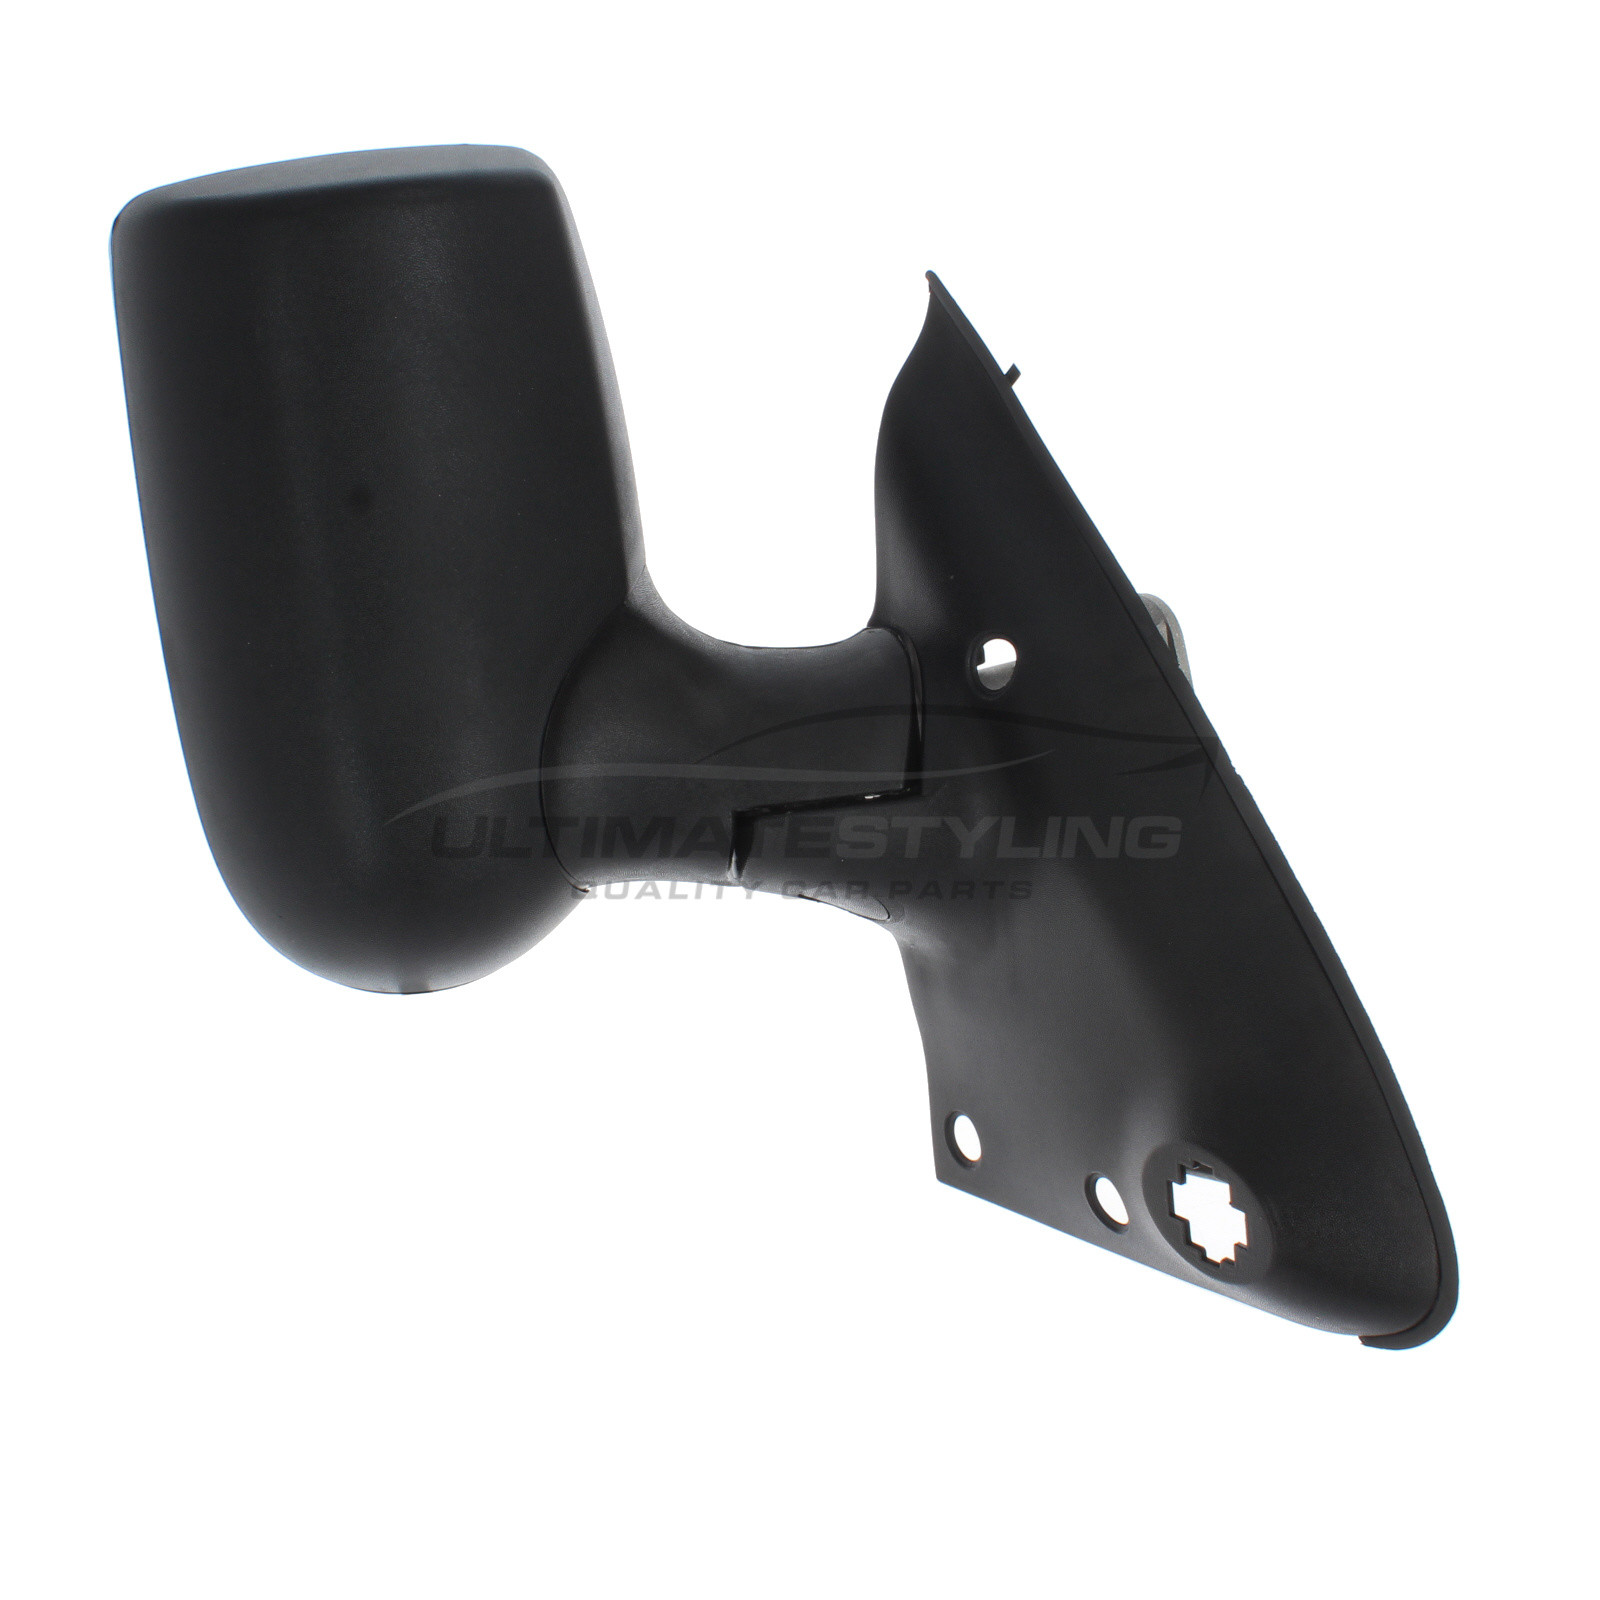 Ford Transit Mk6 & 7 2000-2014 Replacement Short Arm Electric Wing Mirror RH